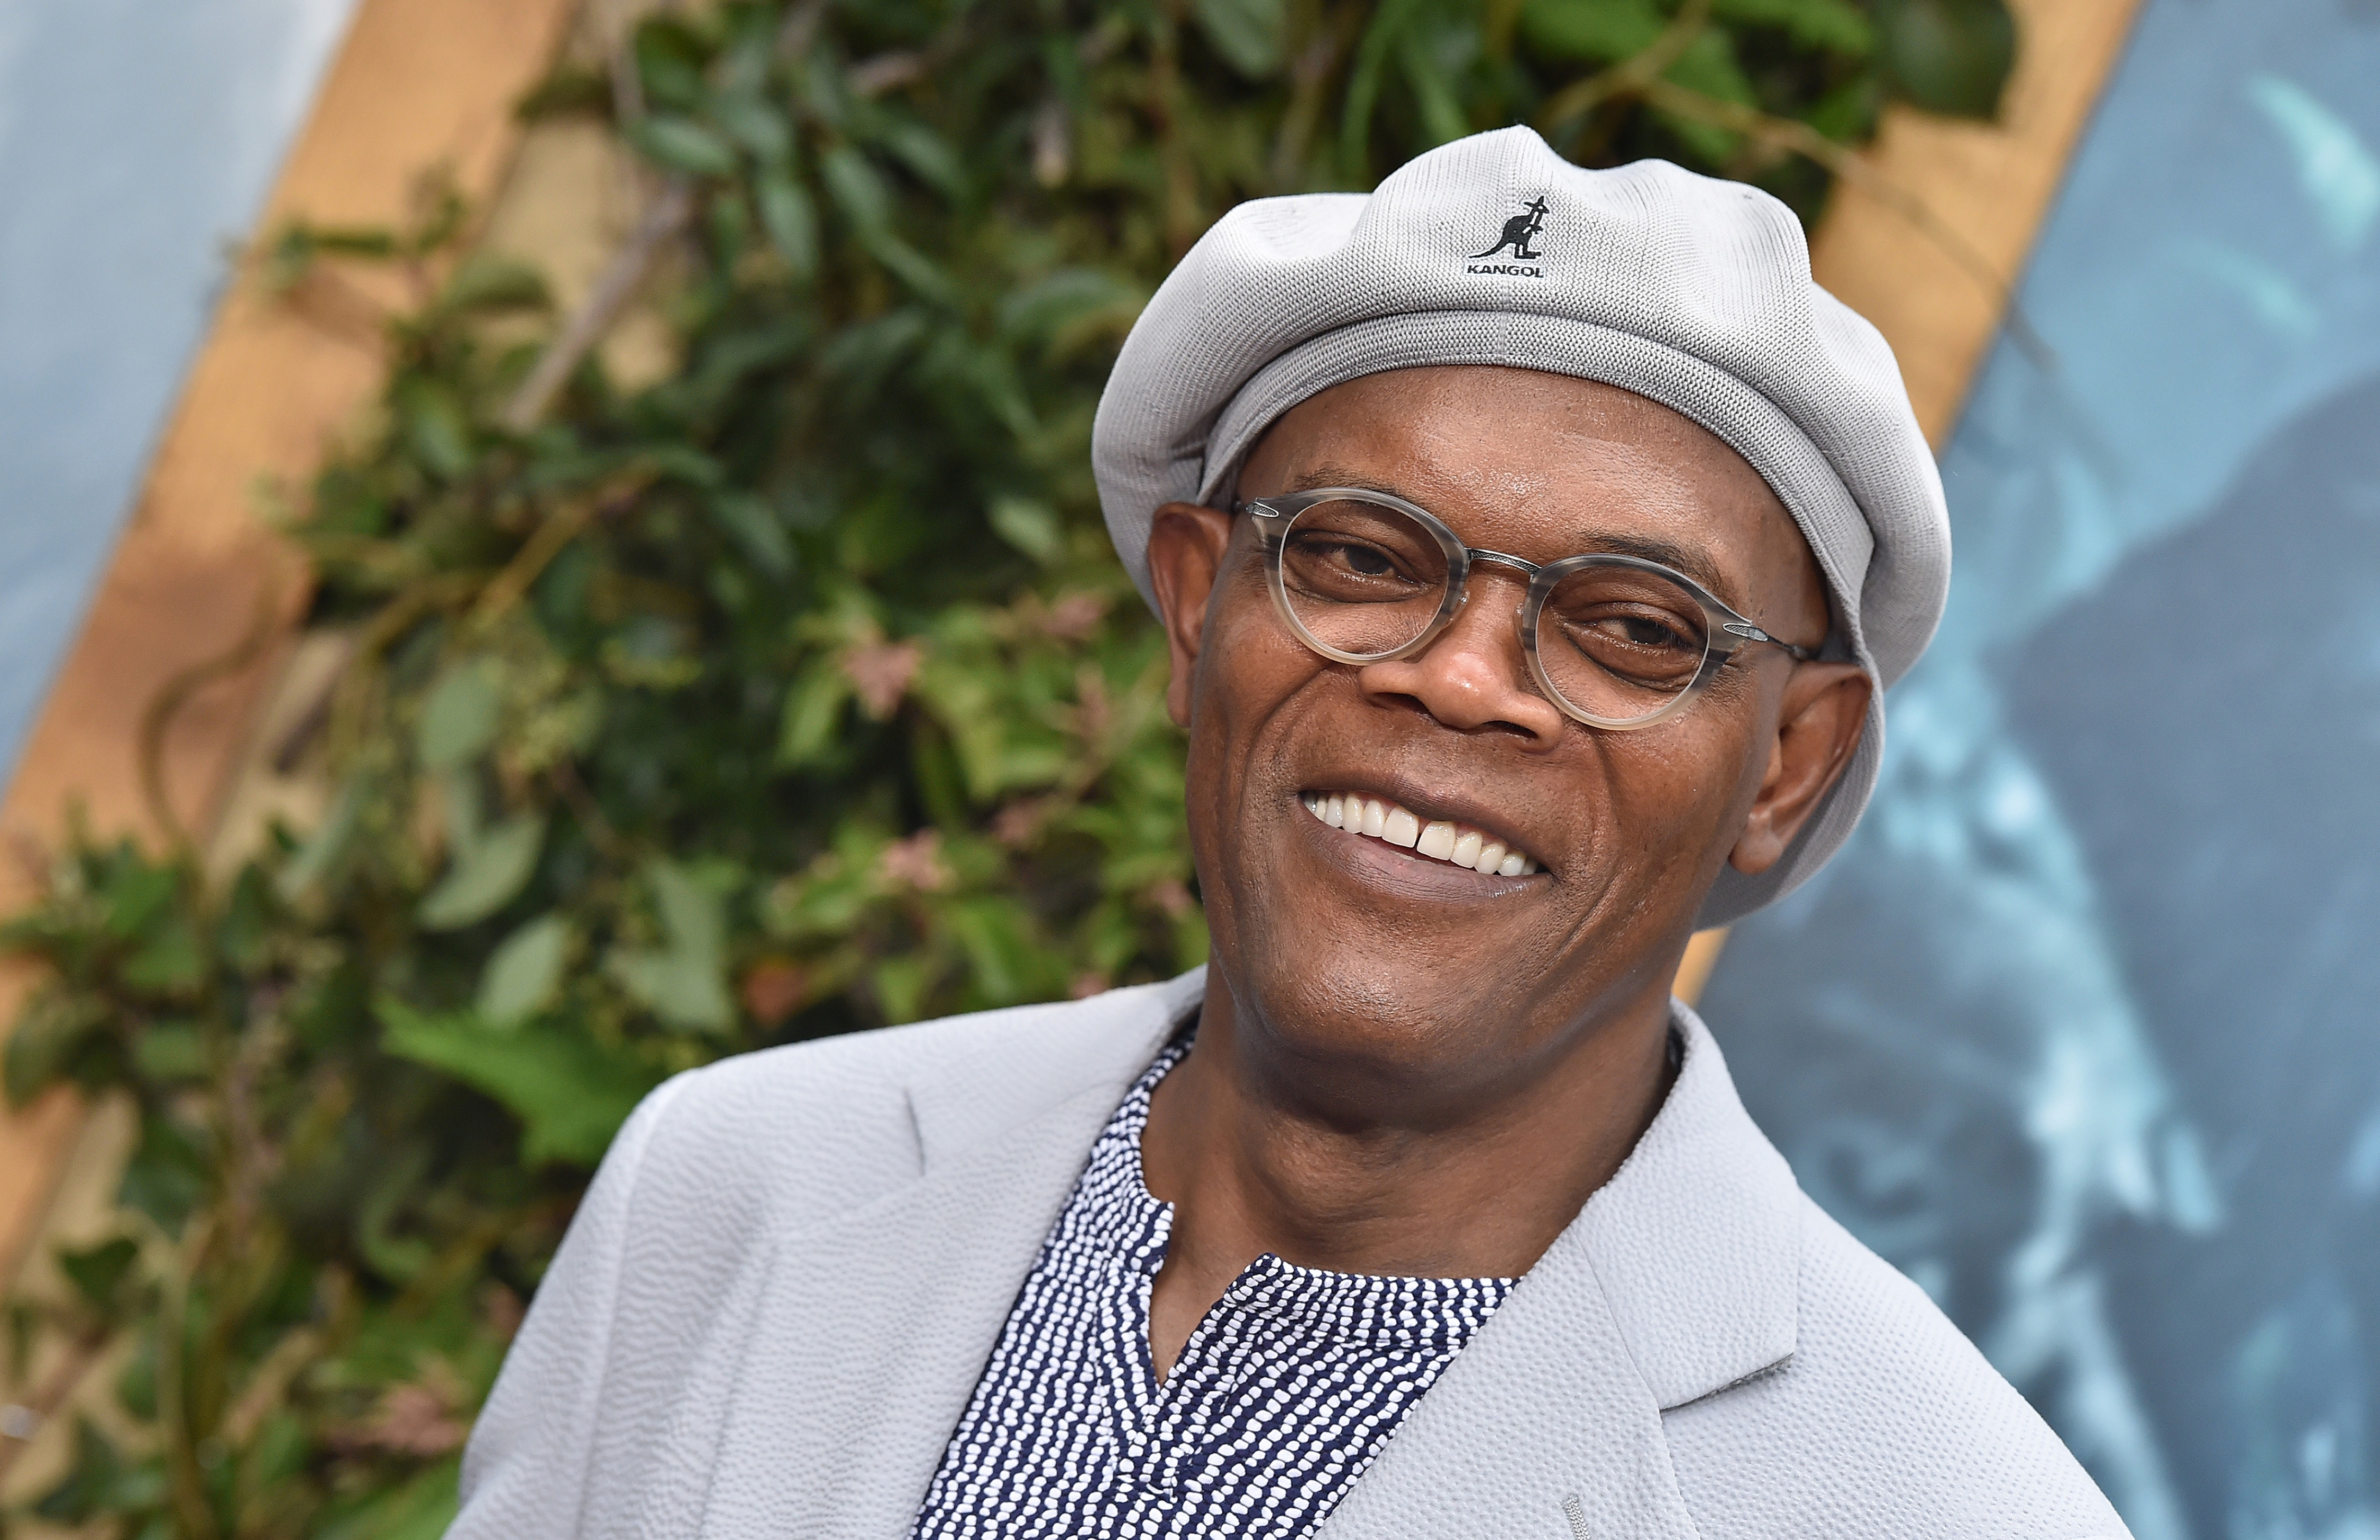 Samuel L. Jackson Doesn’t ‘Give A F–K’ If You Stop Watching His Movies Due To His Politics